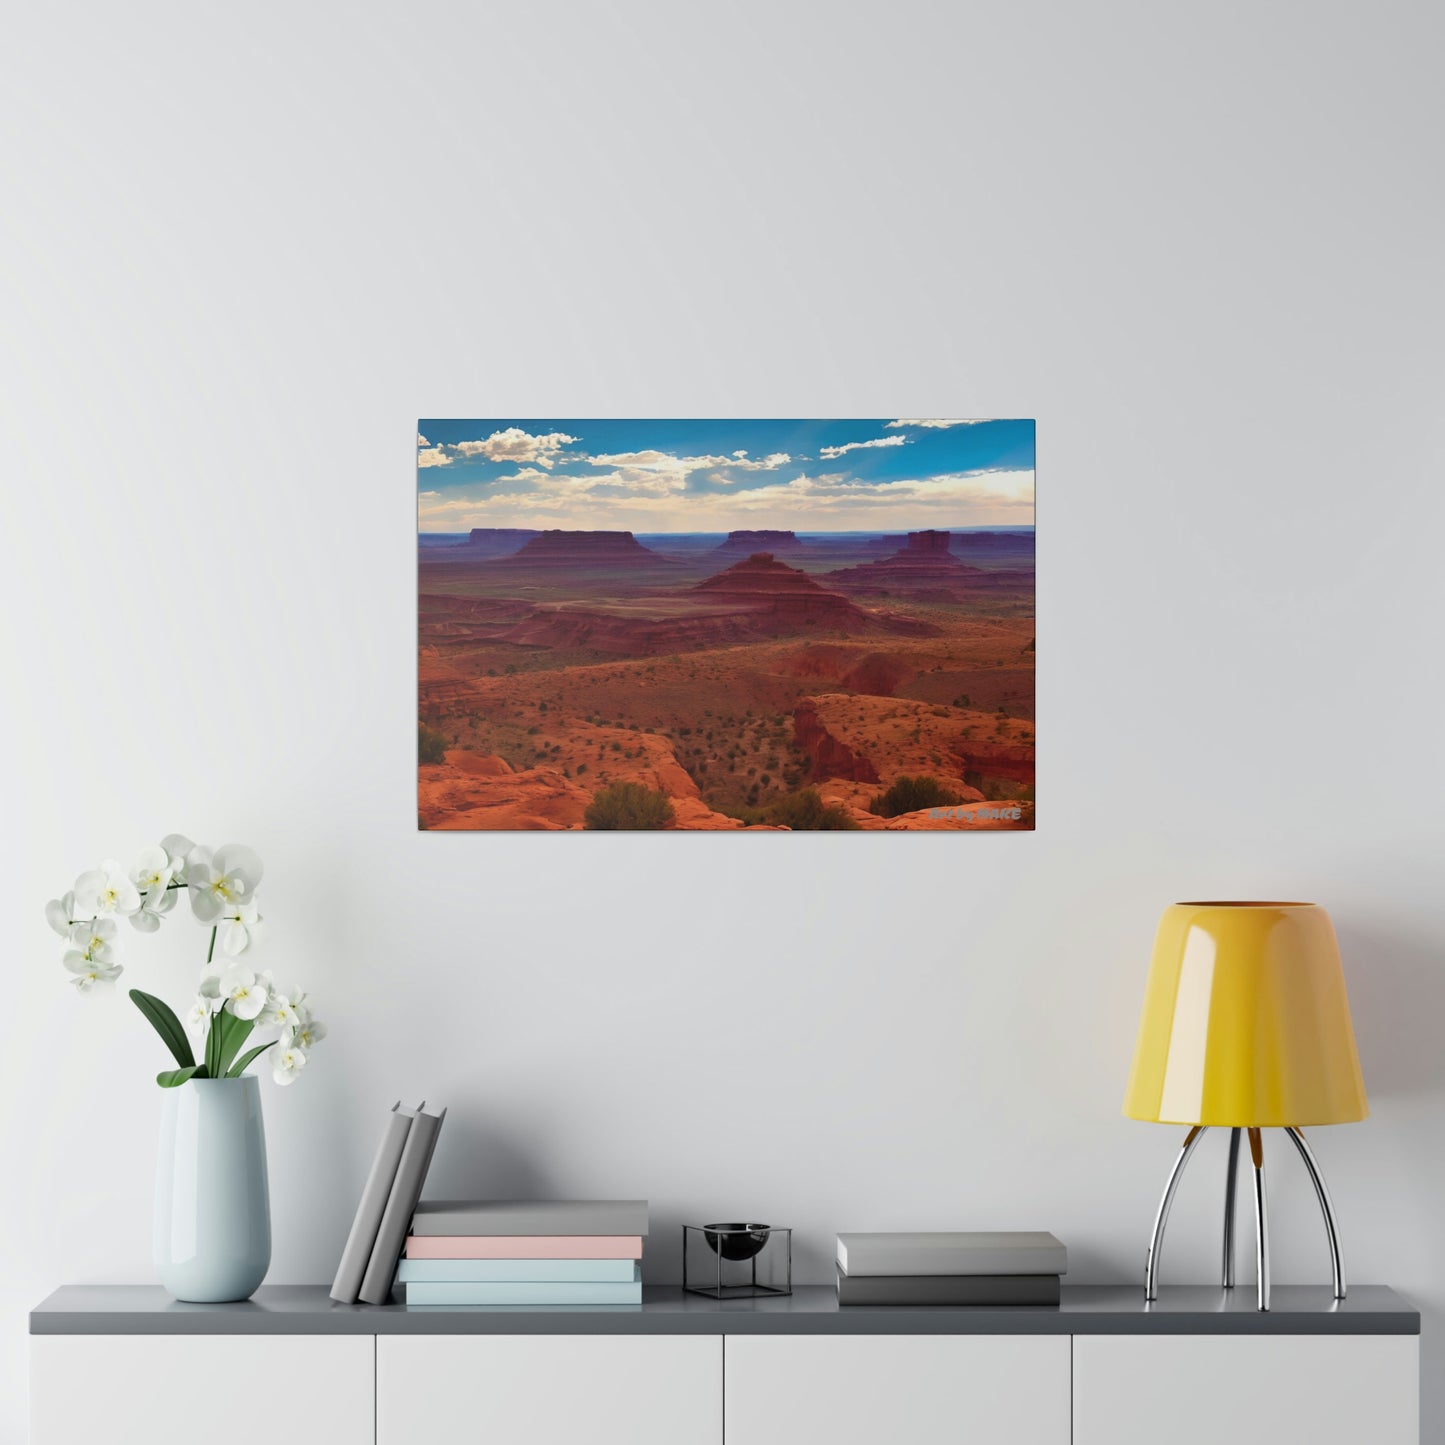 American Valley of the Gods 6 - 24"x16" Matte Canvas, Stretched, 0.75"